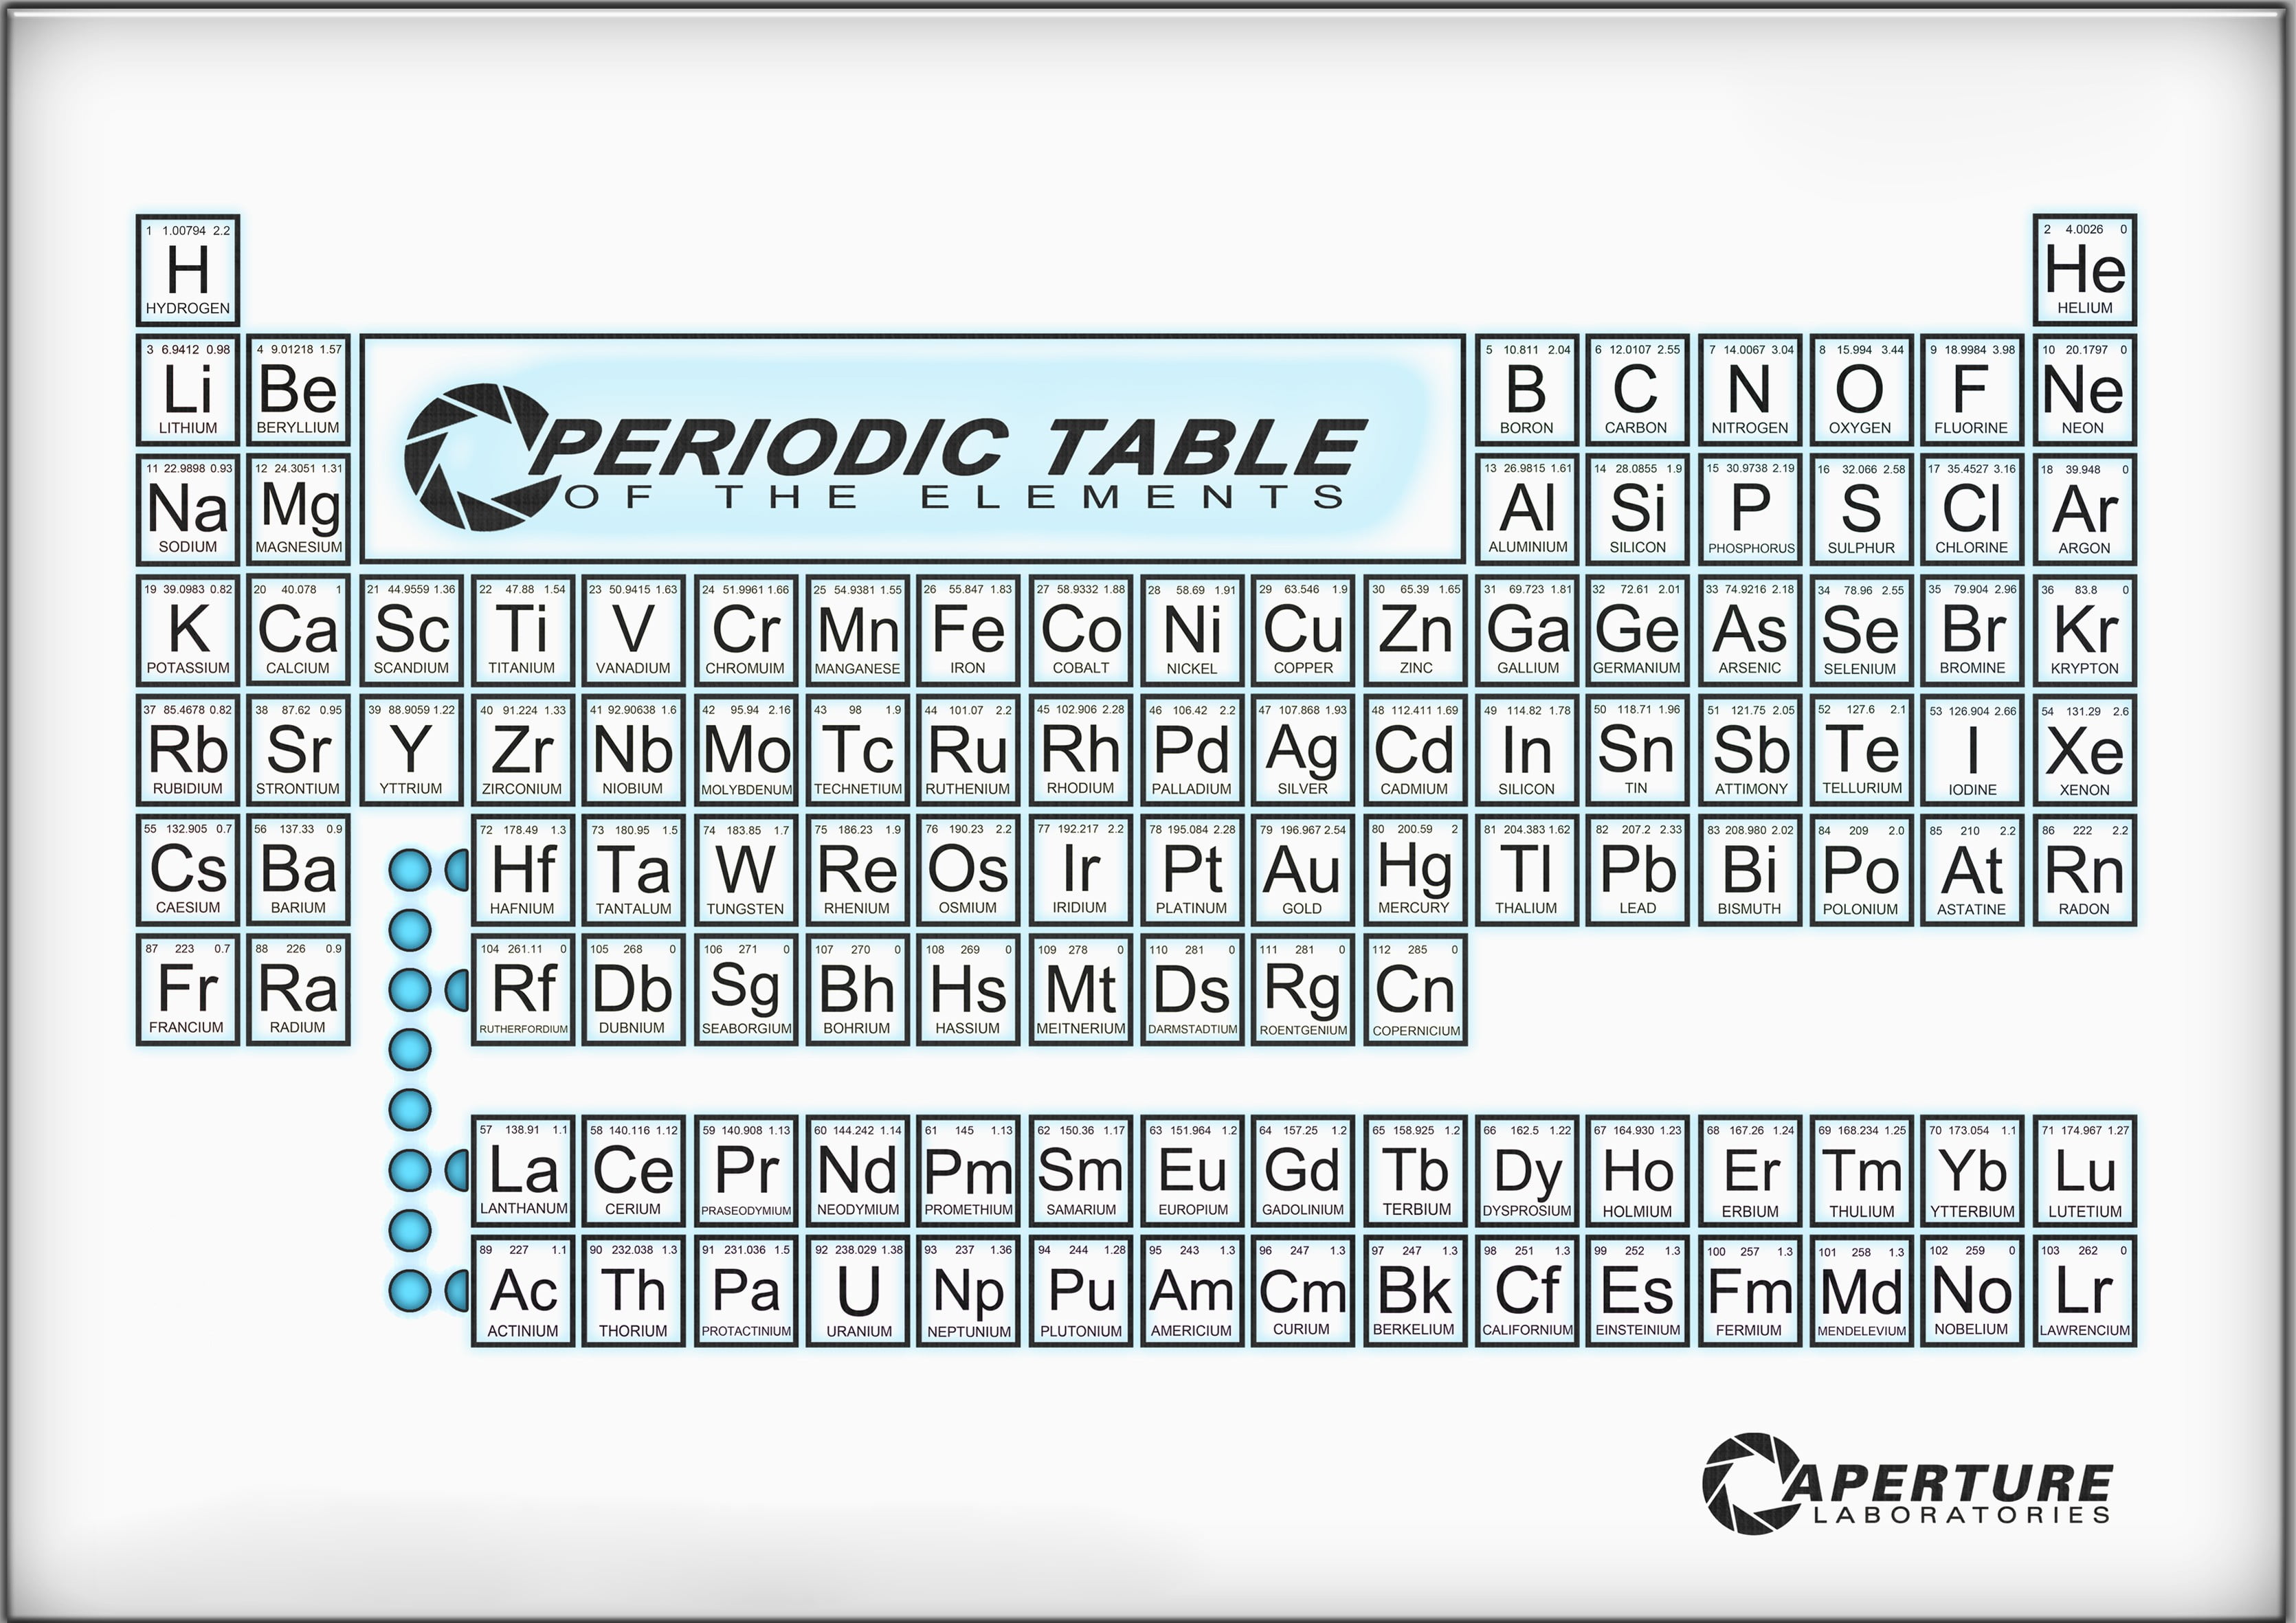 Periodic Table of the elements, Aperture Laboratories, text, communication